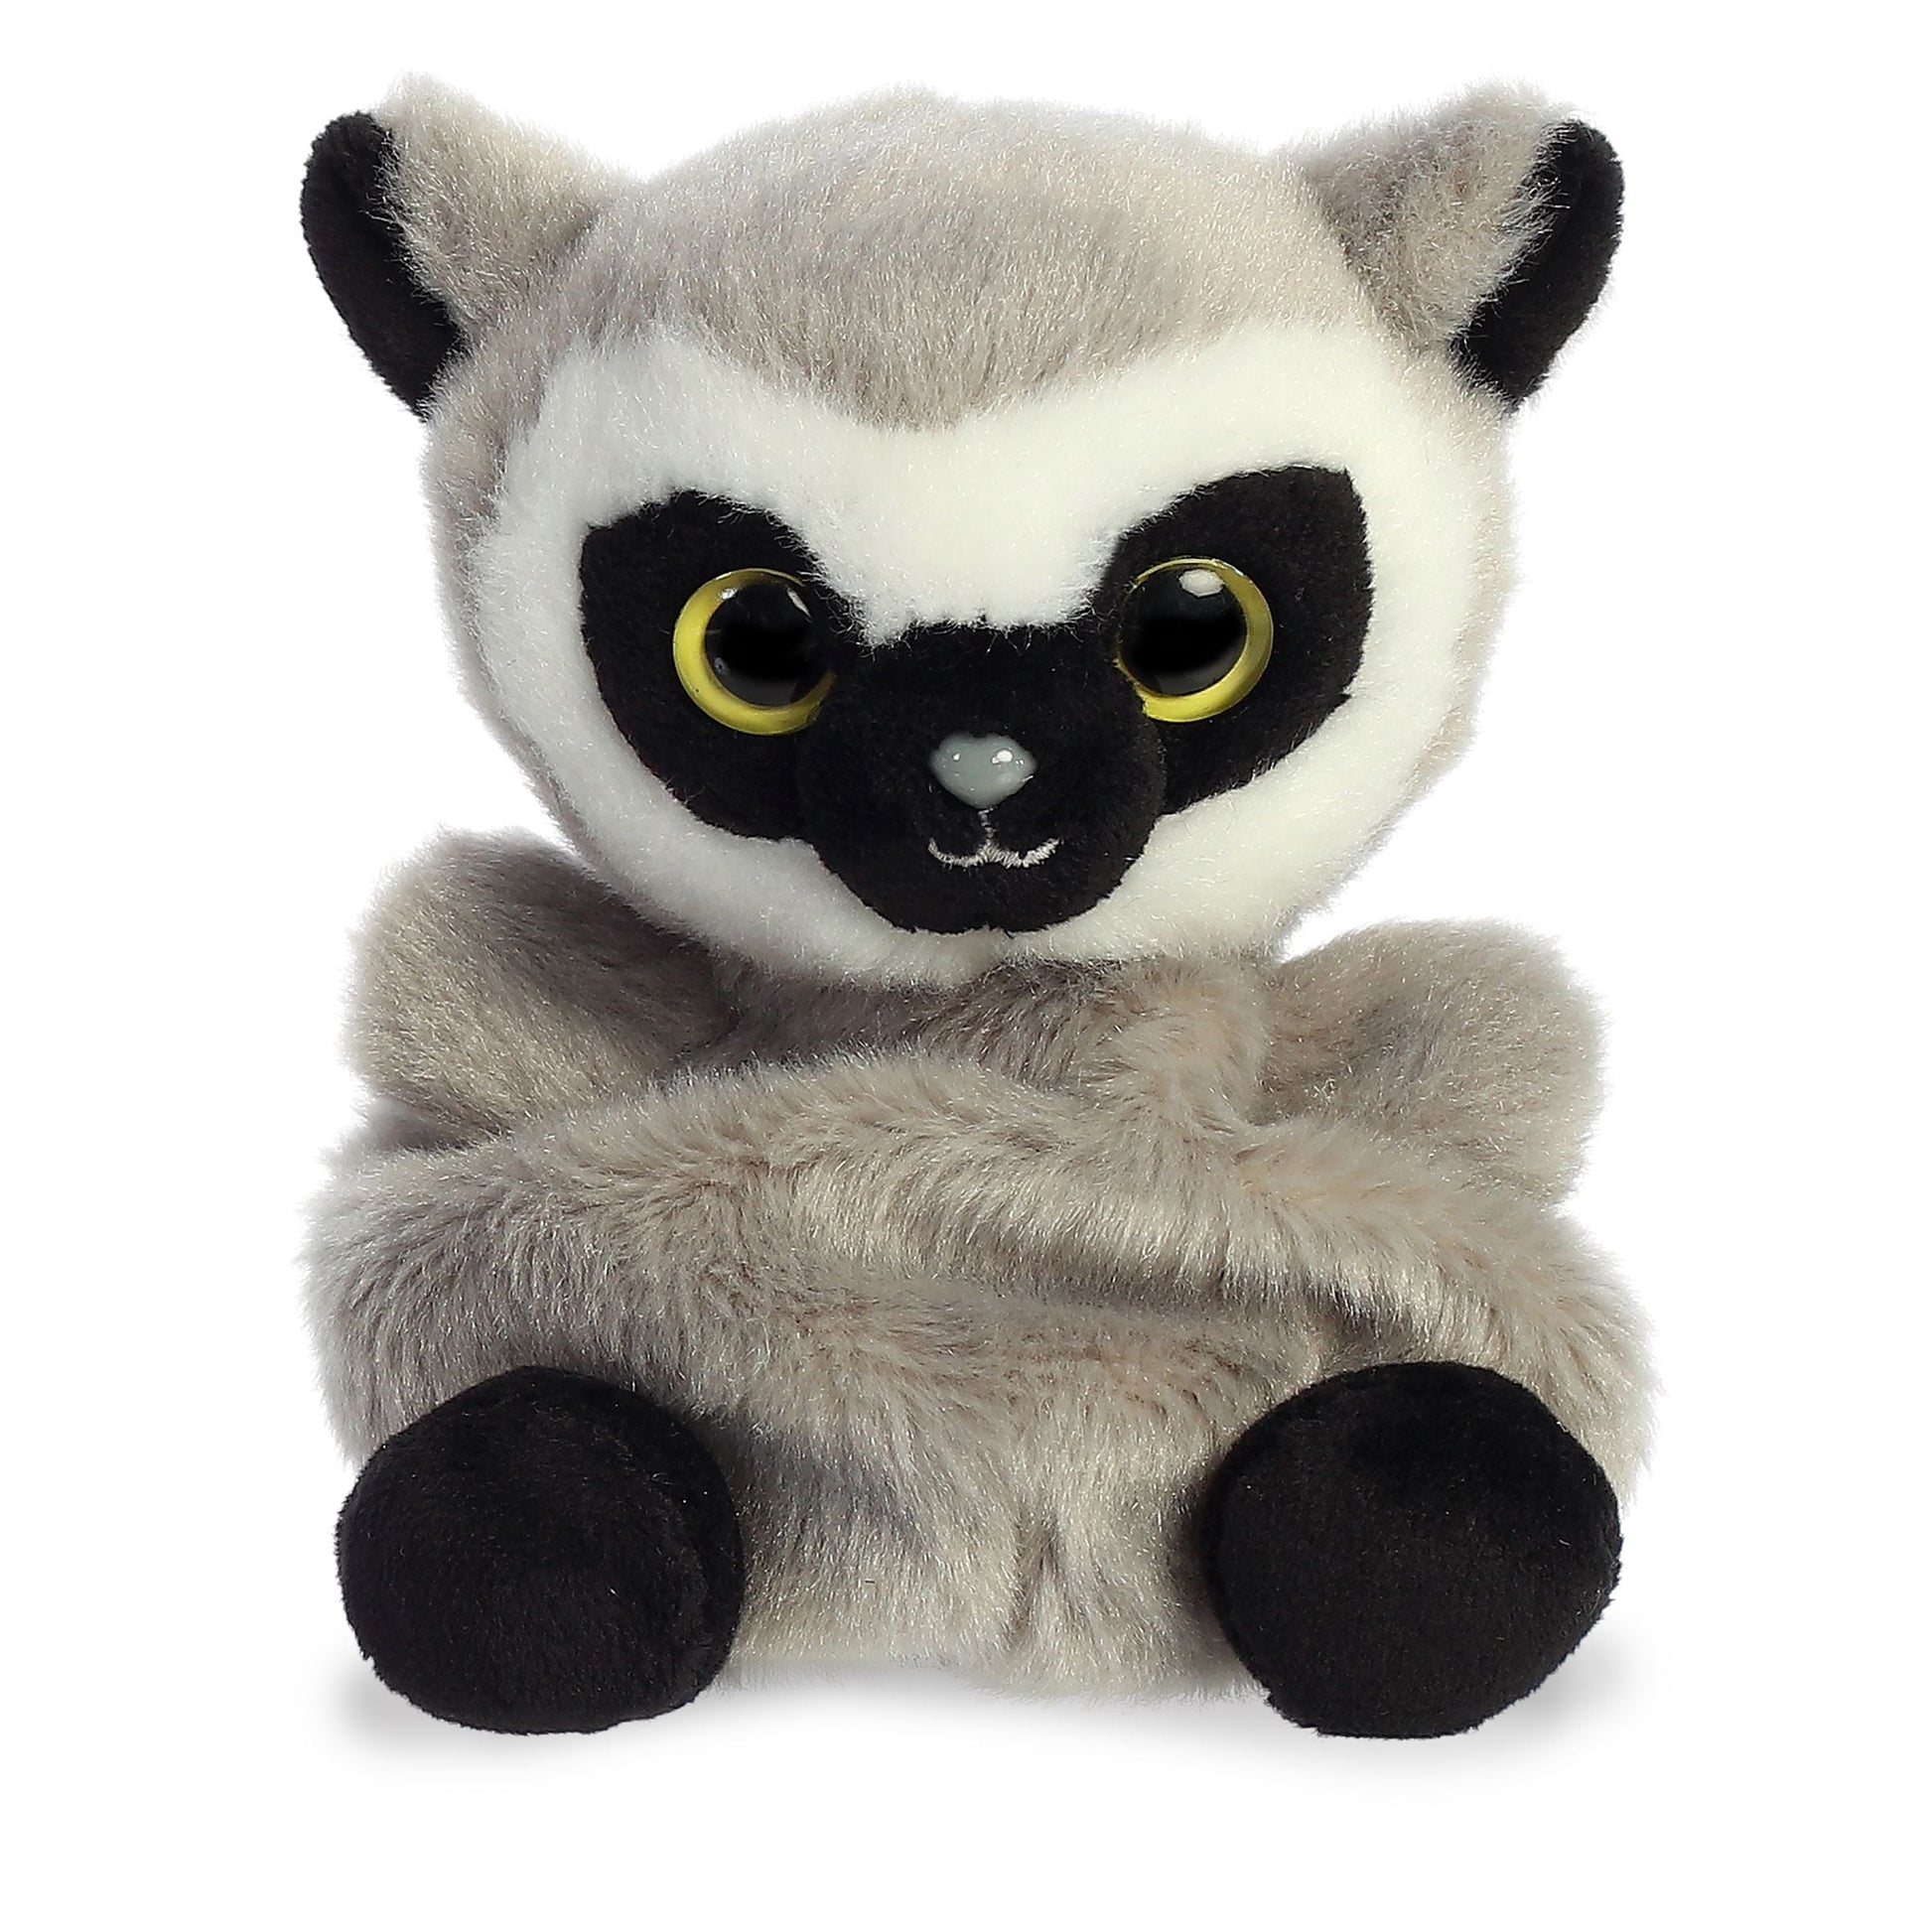 From the Netflix Original show, YooHoo to the Rescue, Lemmee is the thoughtful, knowledgable philosopher of the crew! This Lemmee is a soft grey and black Lemur with a small, understuffed body designed to fit perfectly in the palm of your hand